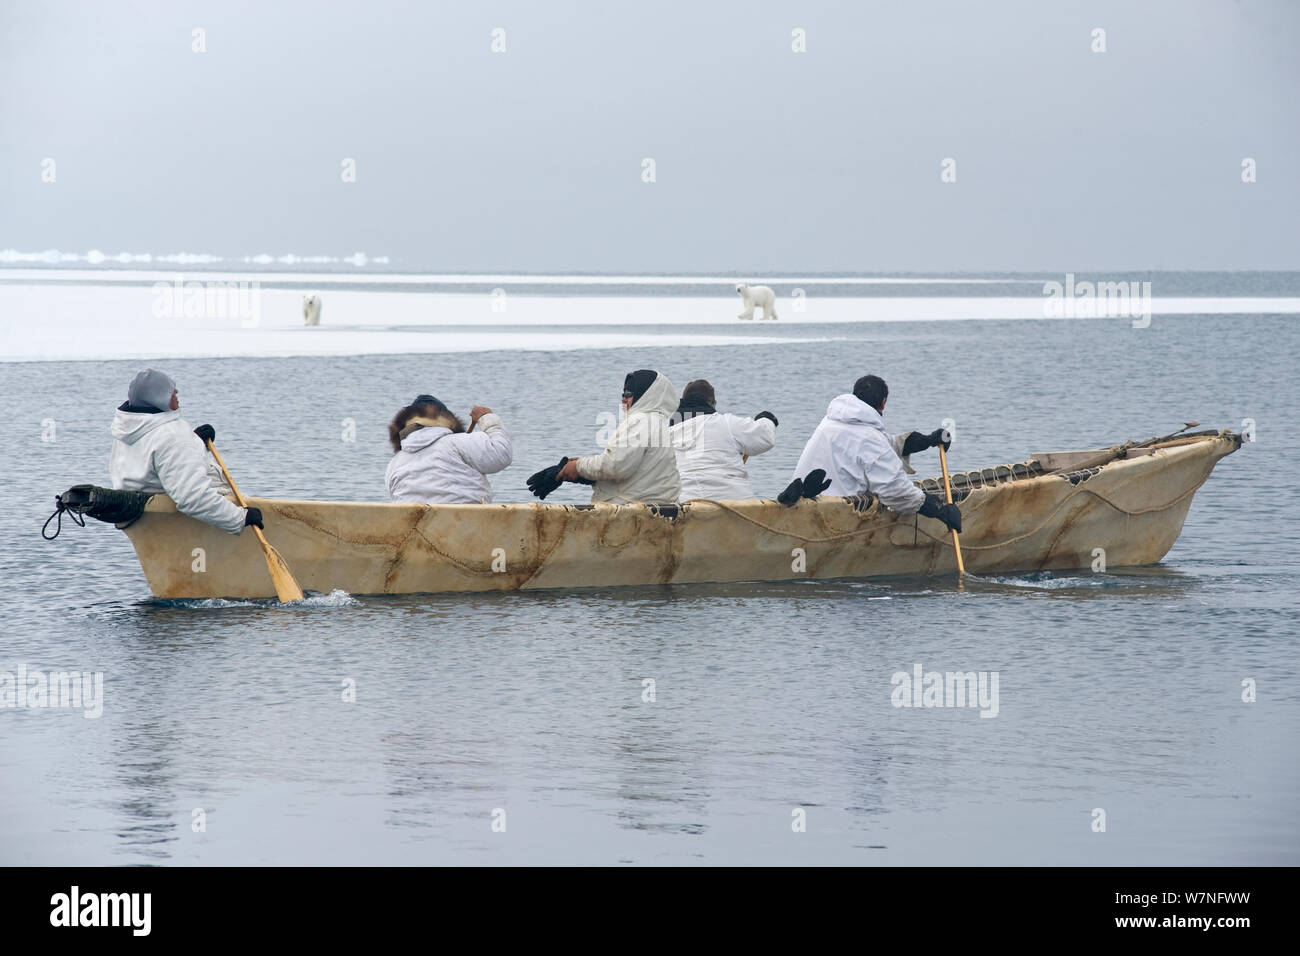 Inupiaq subsistence whalers in their umiak - bearded seal skin boat - watch a polar bear (Ursus maritimus) sow and cub travel along the edge of the open lead in the pack ice, during spring whaling season. Chukchi Sea, offshore from Barrow, Arctic coast of Alaska, April 2012. Stock Photo